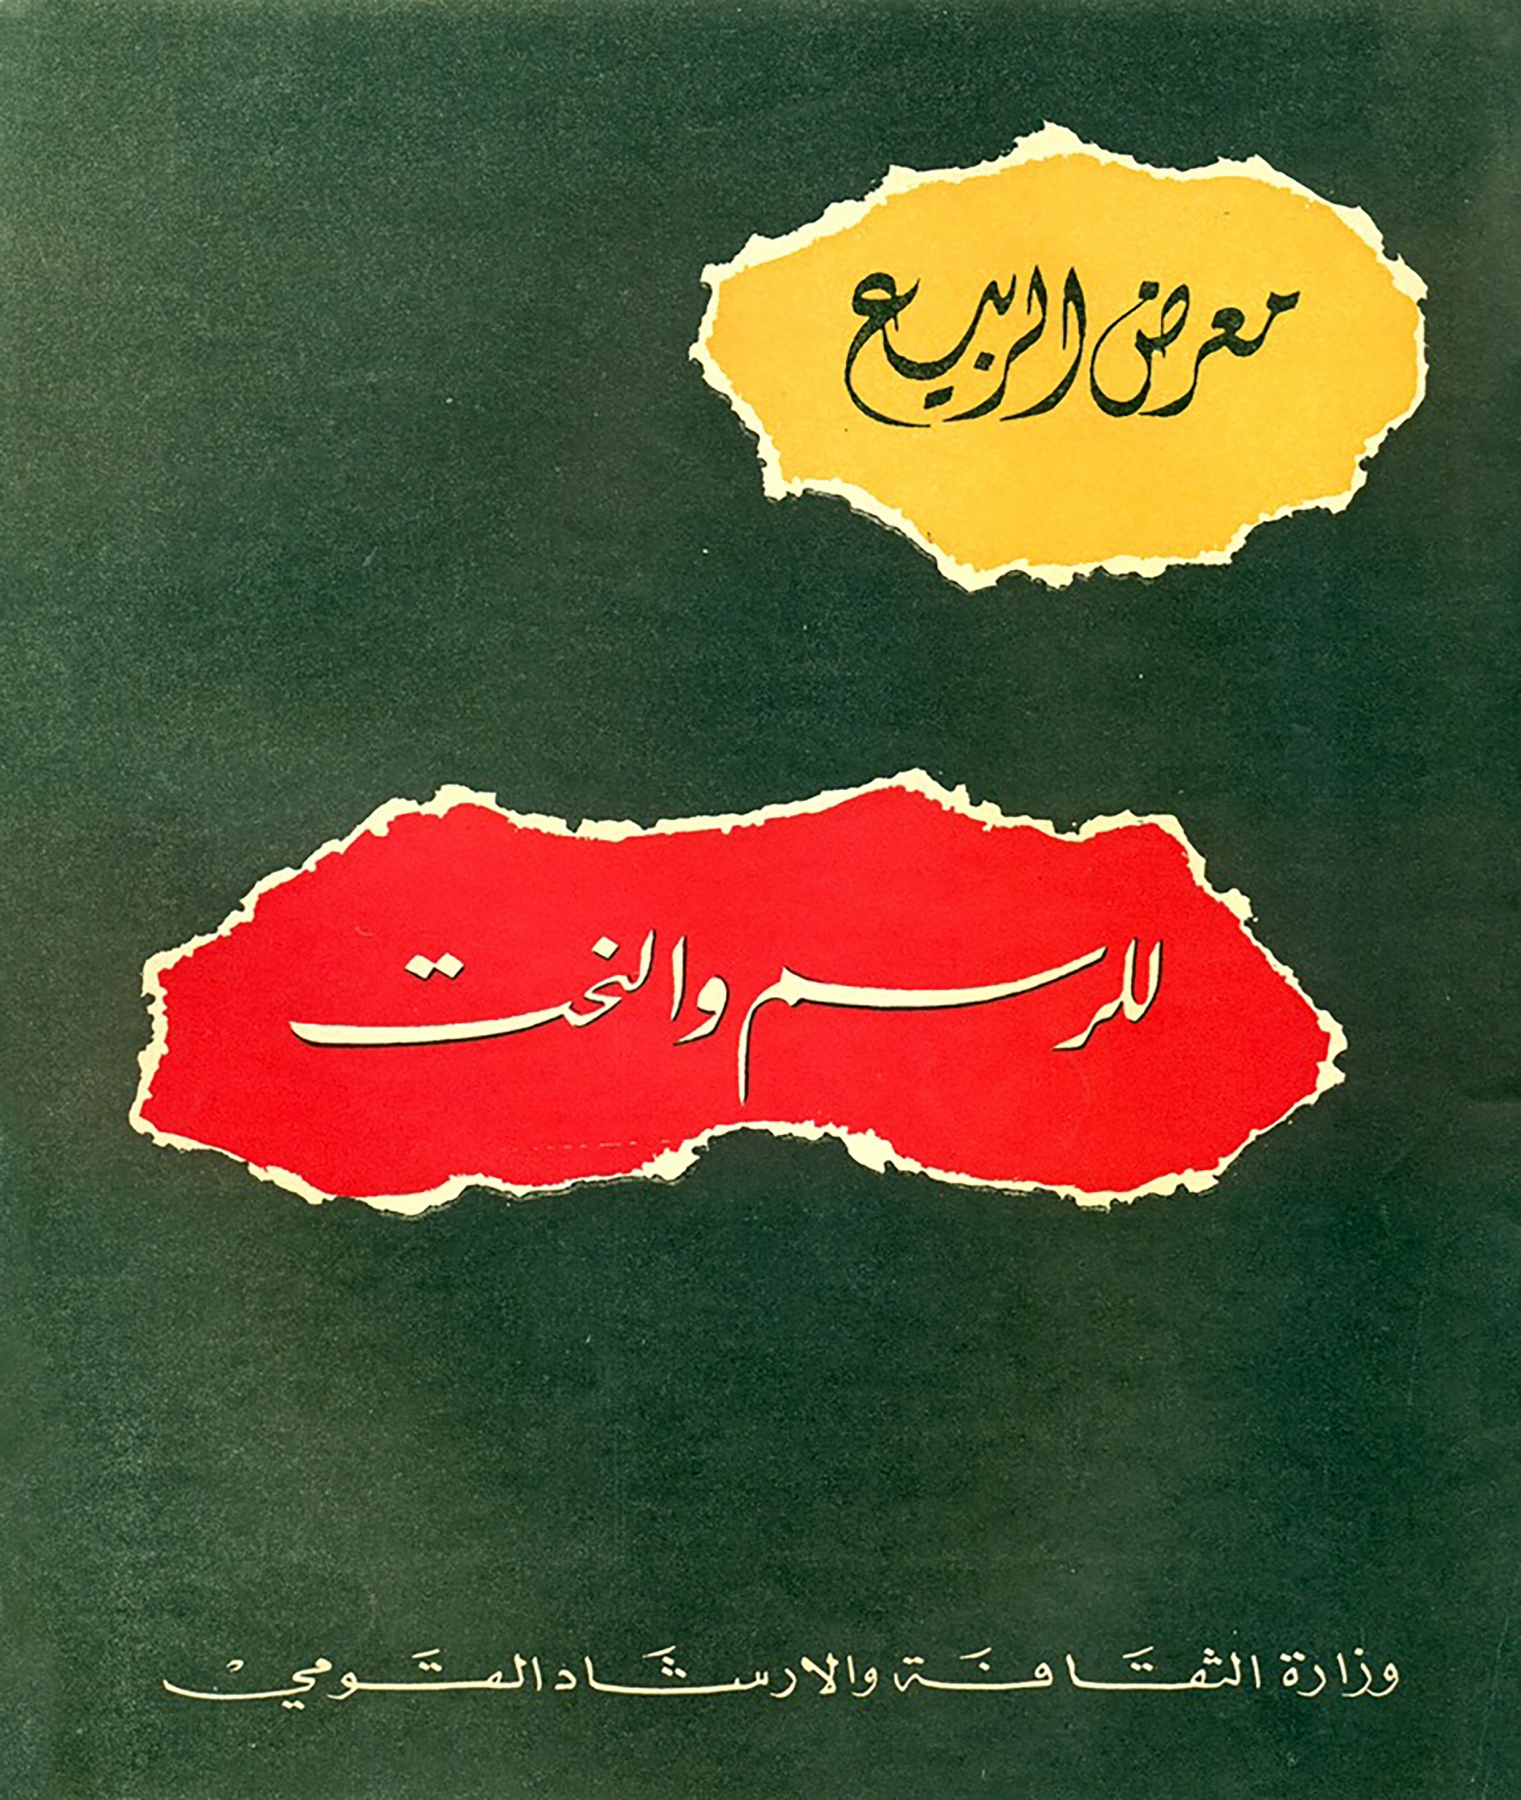 Gallery guide of&nbsp;the Spring Exhibition for Painting and Sculpture, 1959. Archive of artist Abdulaziz Nashawati.